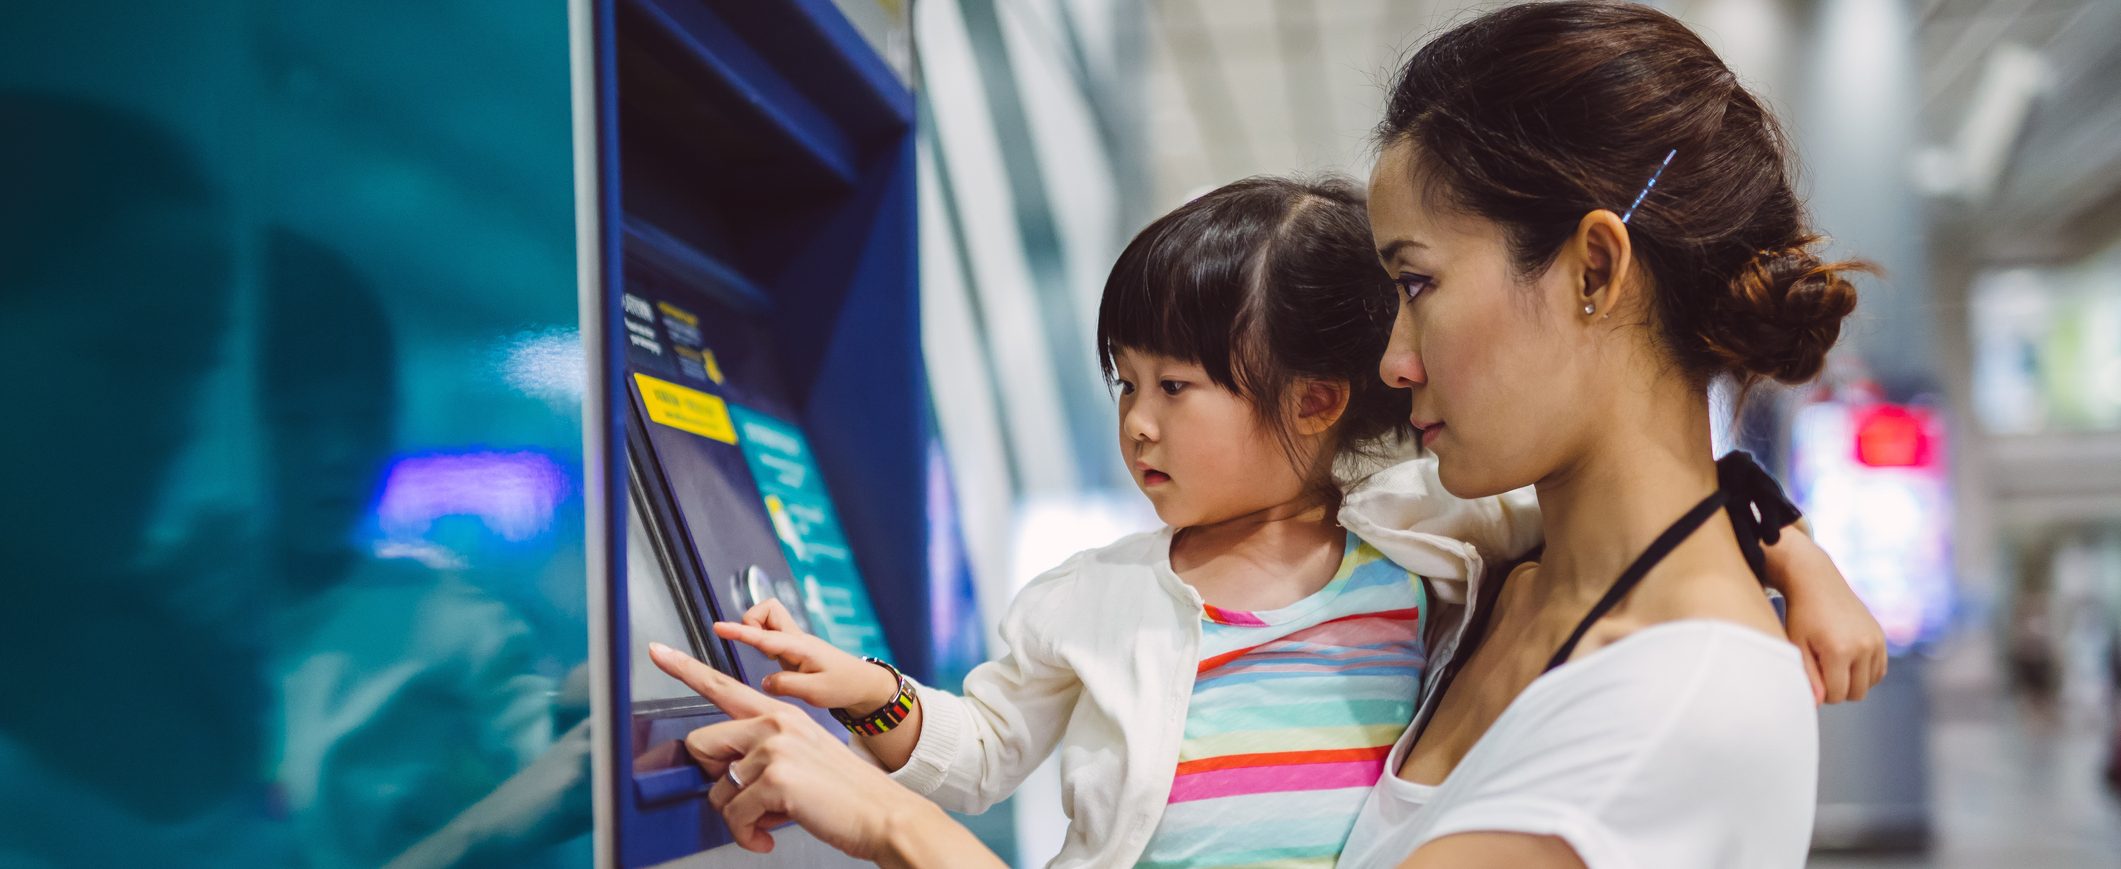 A woman holds her young daughter as they both press an ATM screen.